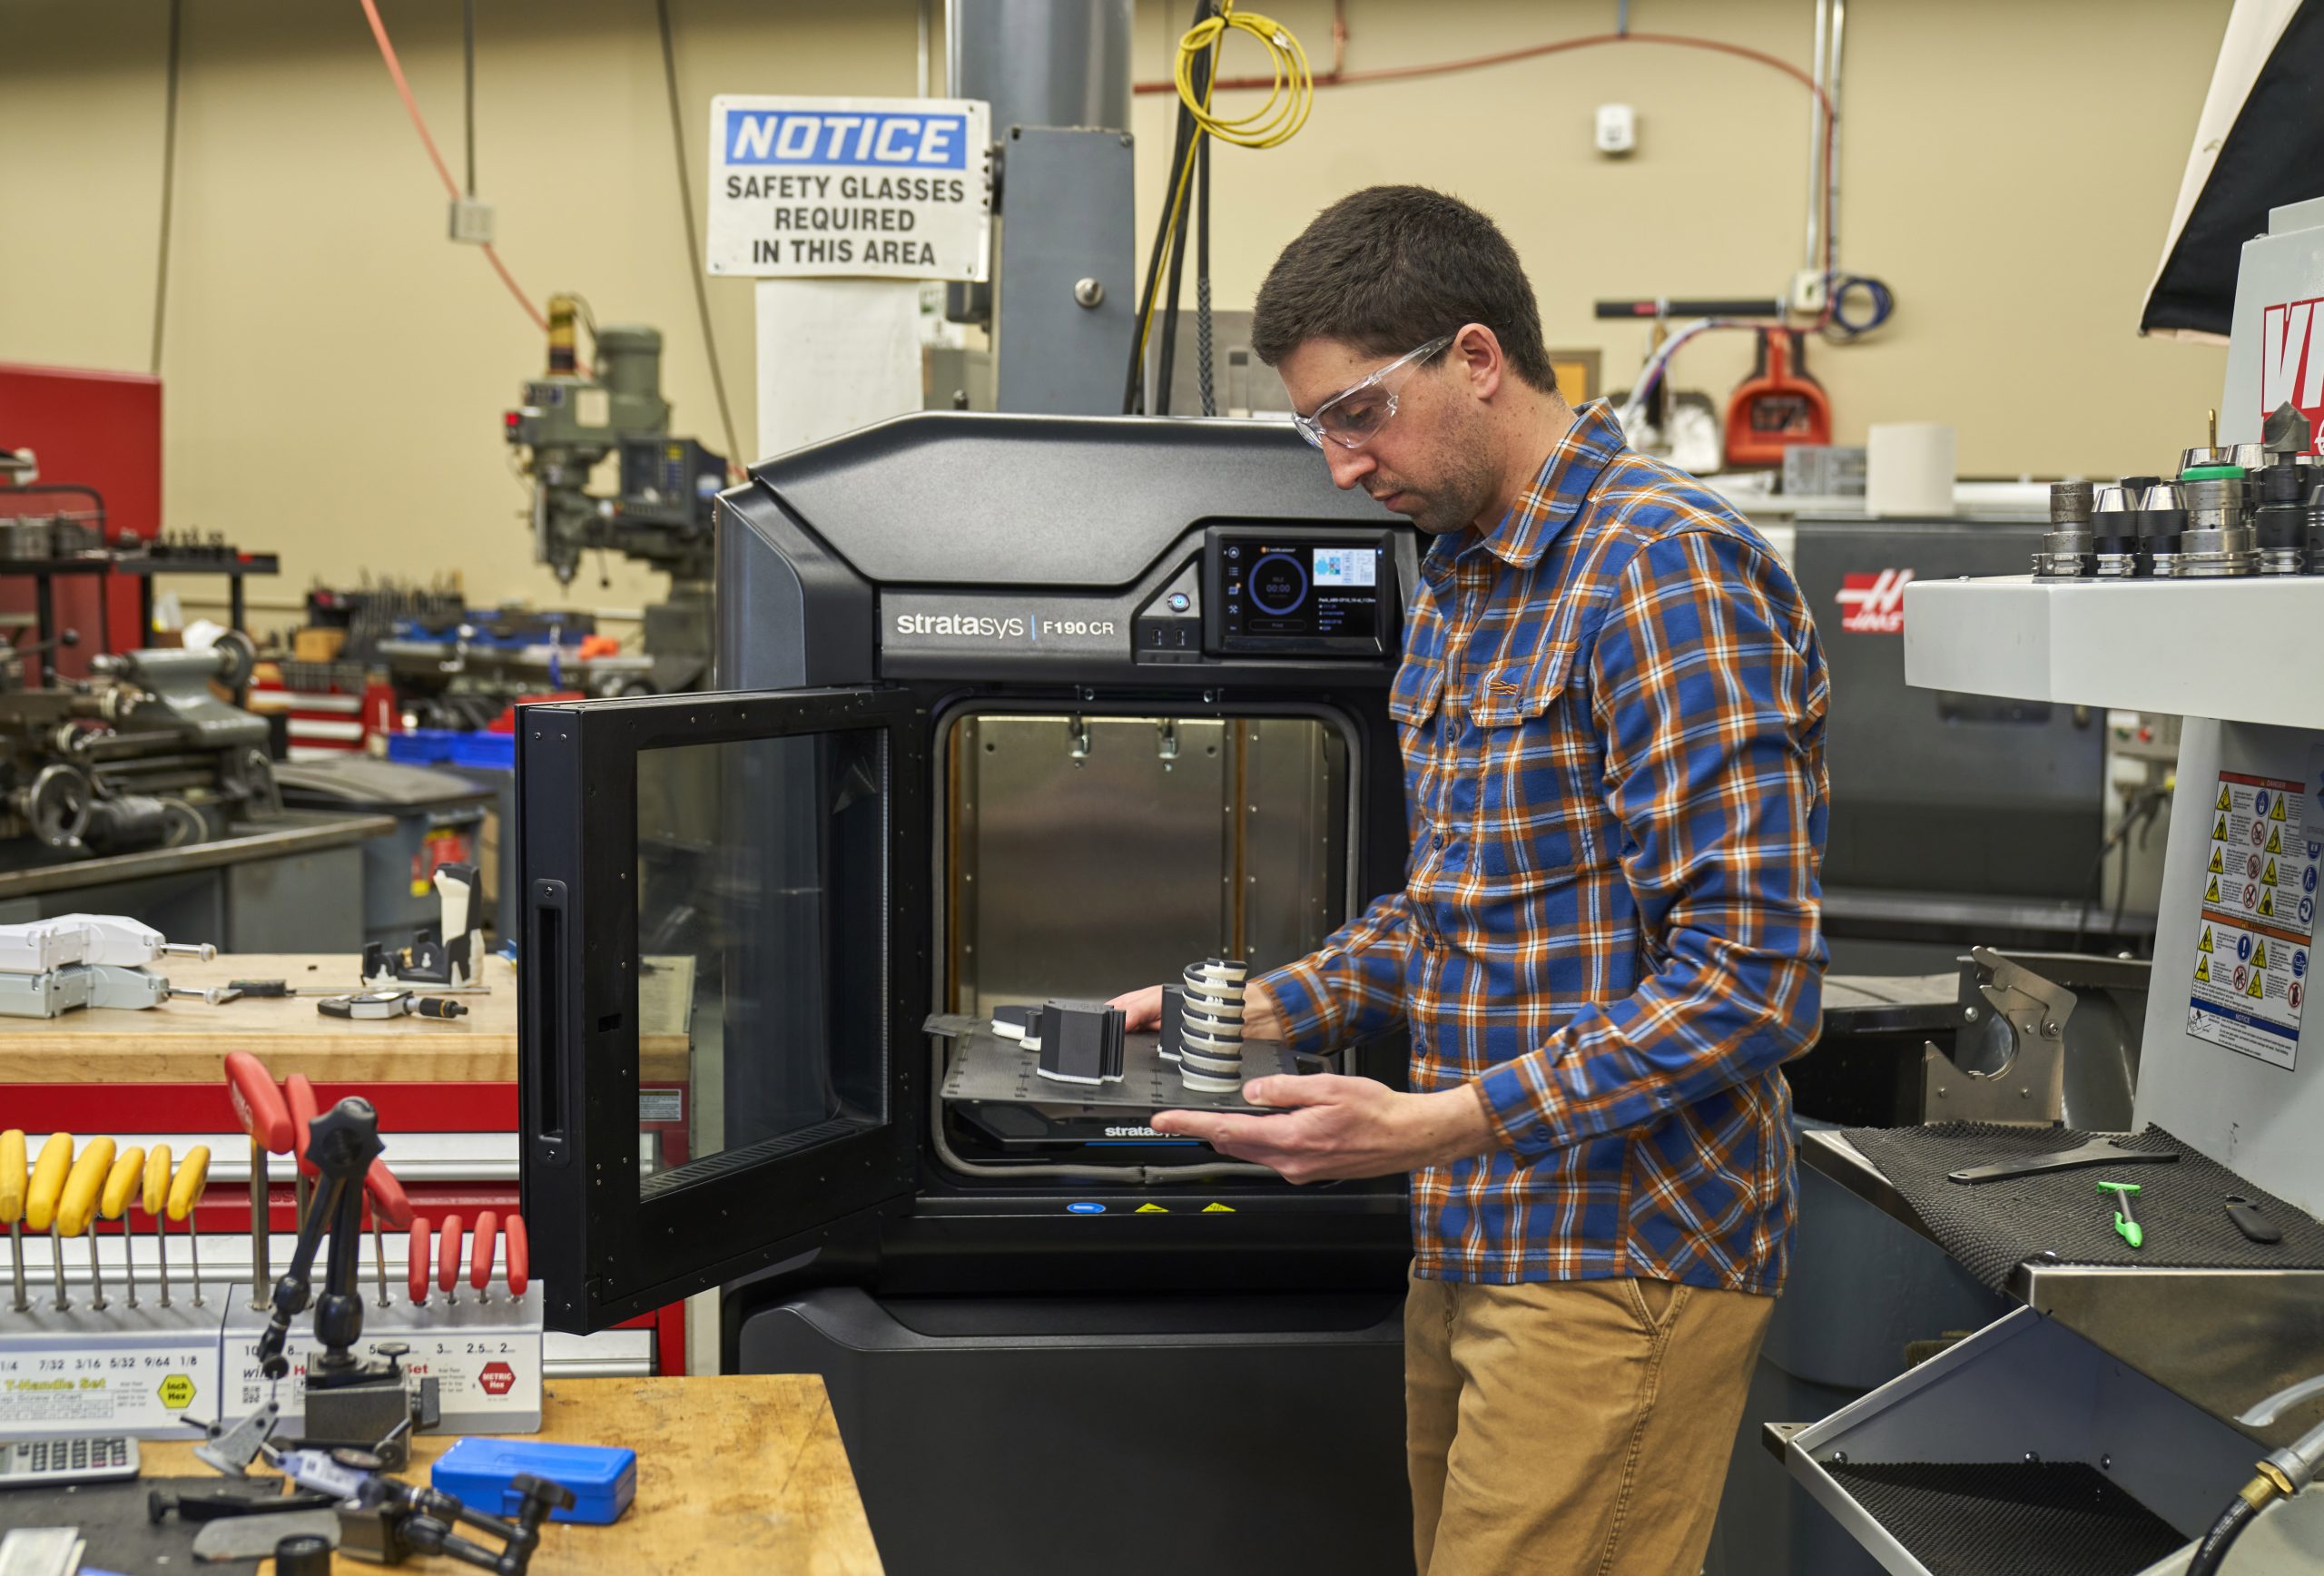 Stratasys announces two new composite 3D printers, 16 new materials, and software updates